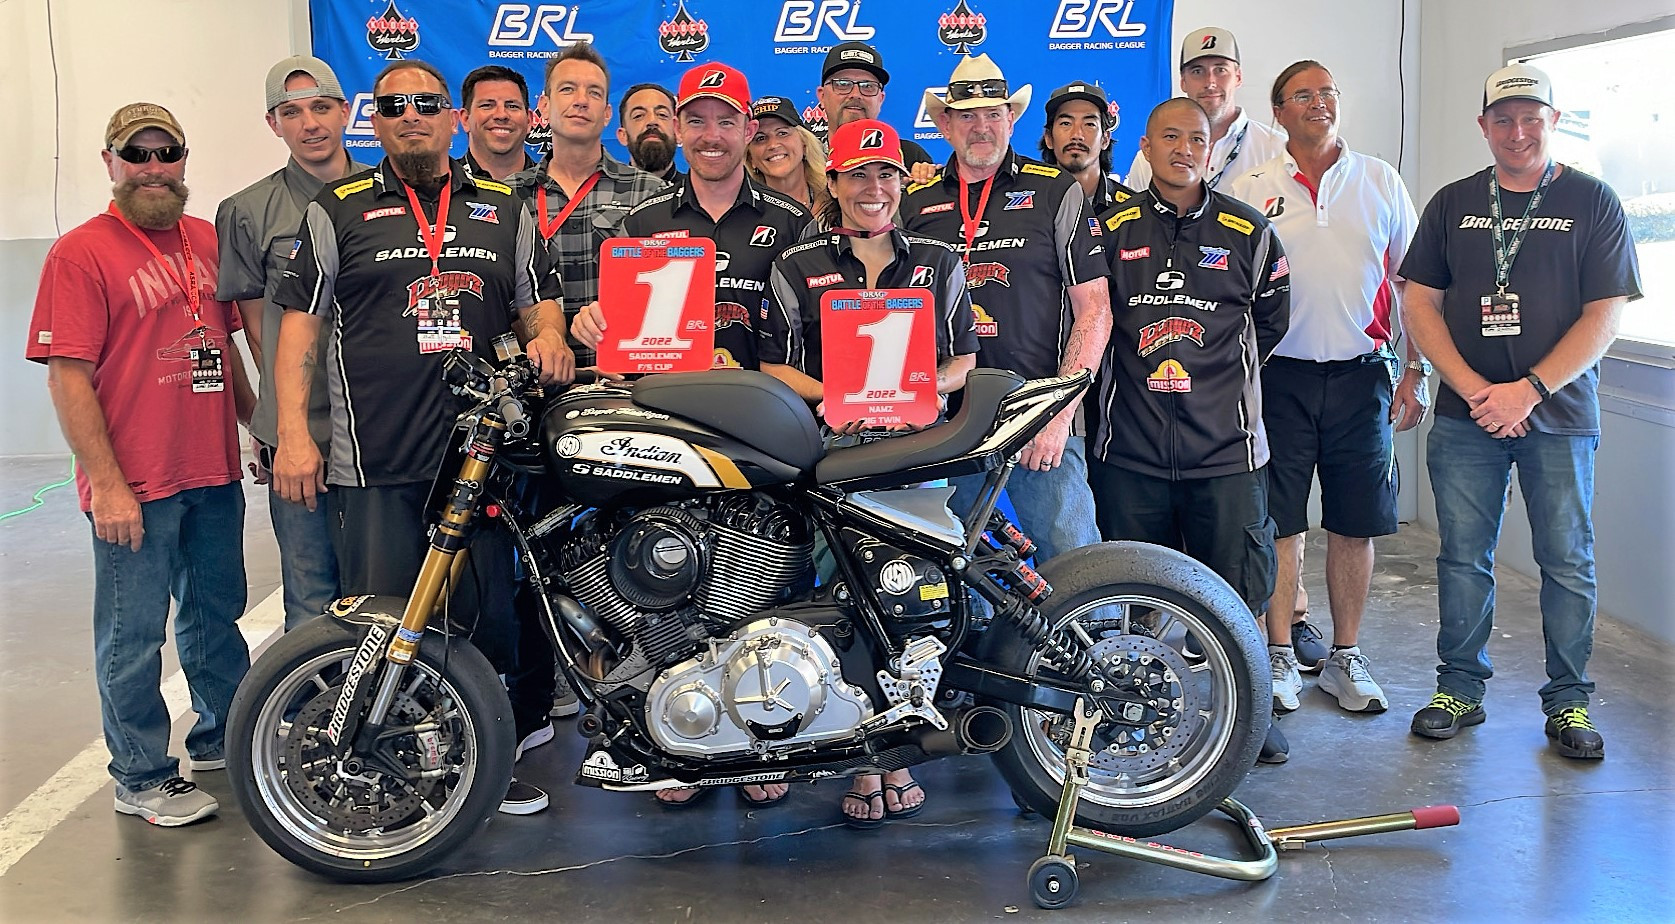 2022 F/S Cup Champion Cory West (left) and 2022 BRL Big Twins Champion Patricia Fernandez (right) with their Bagger Racing League number one plates and their Saddlemen/Lloyd'z Garage team at Daytona. Photo courtesy BRL.